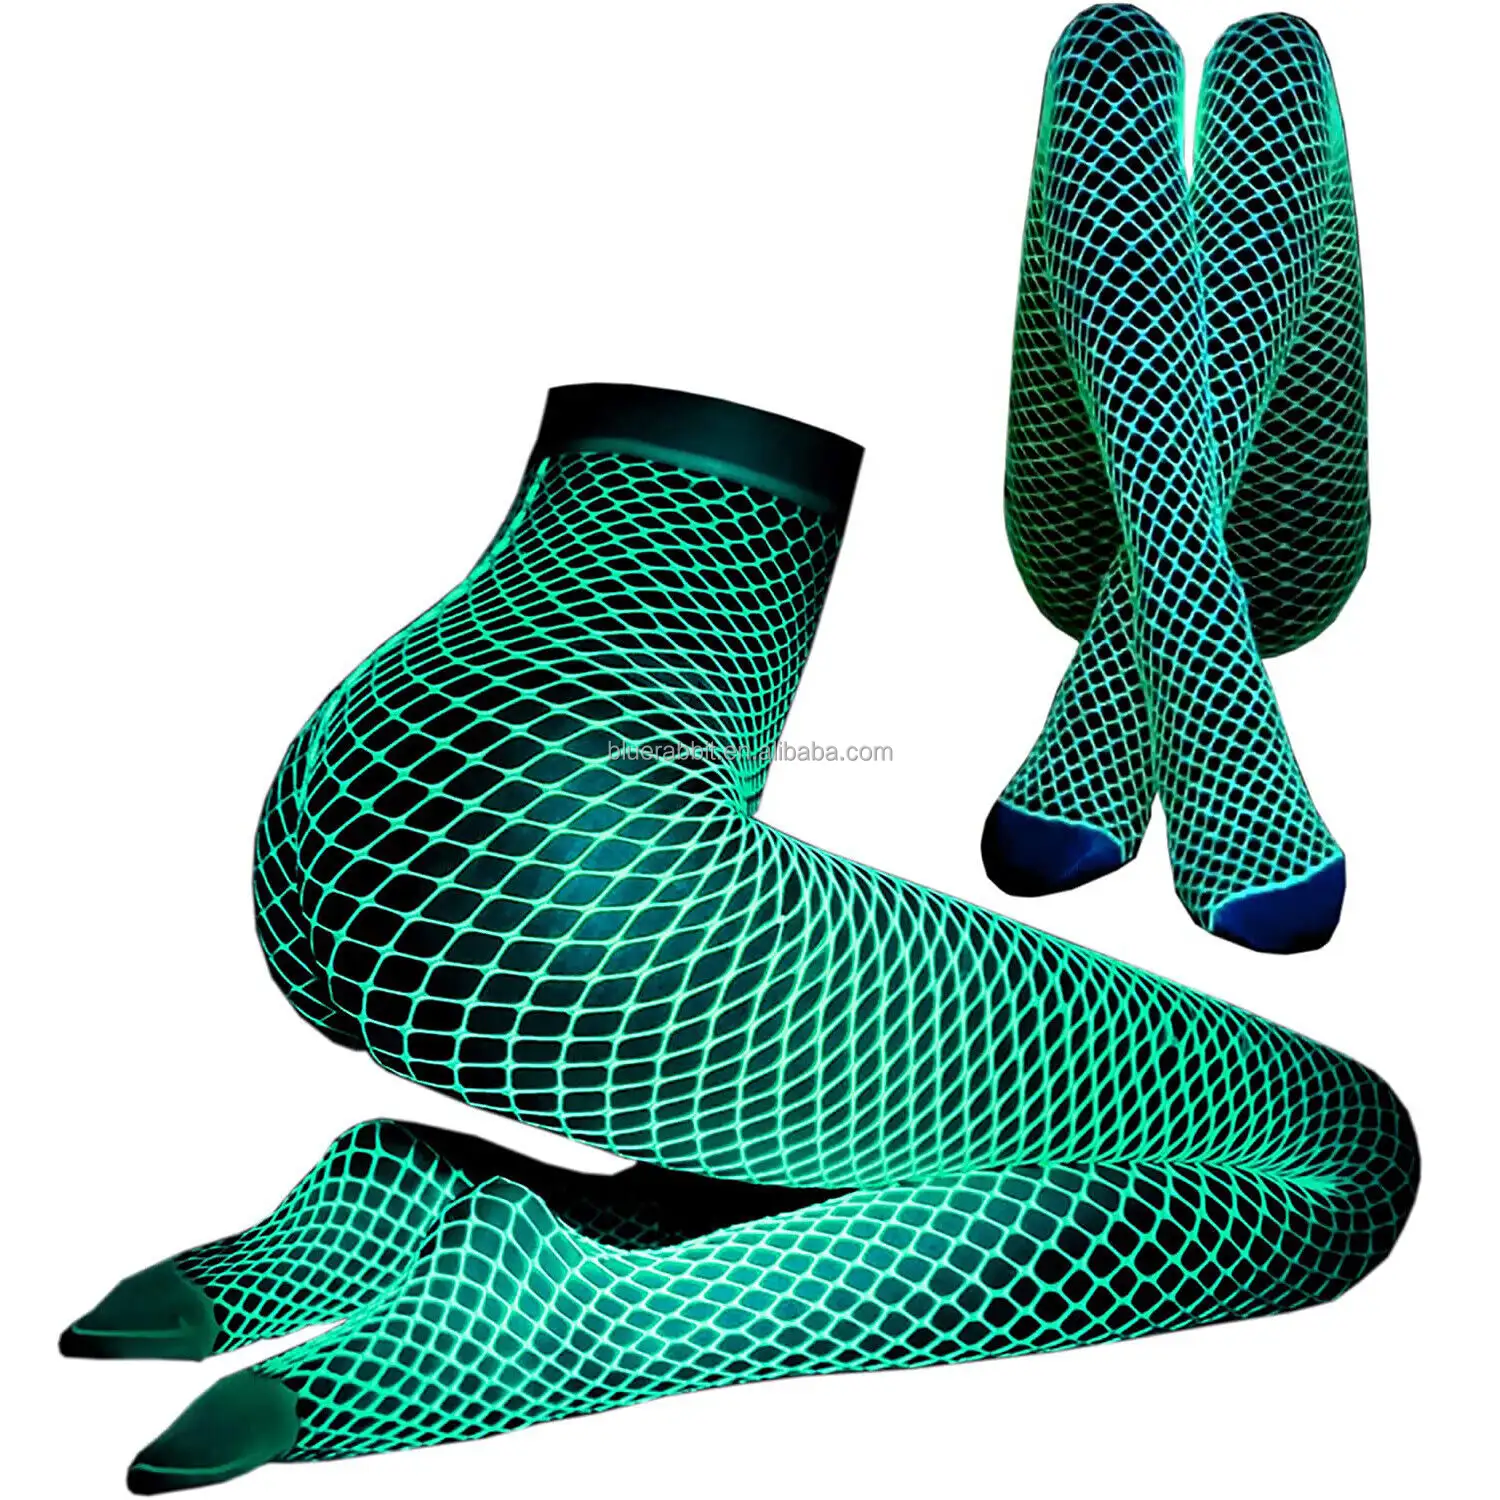 Glow In The Dark Fishnet Stockings Luminous High Waist Thigh Pantyhose Socks Tights Stockings Sexy Lingerie for Women